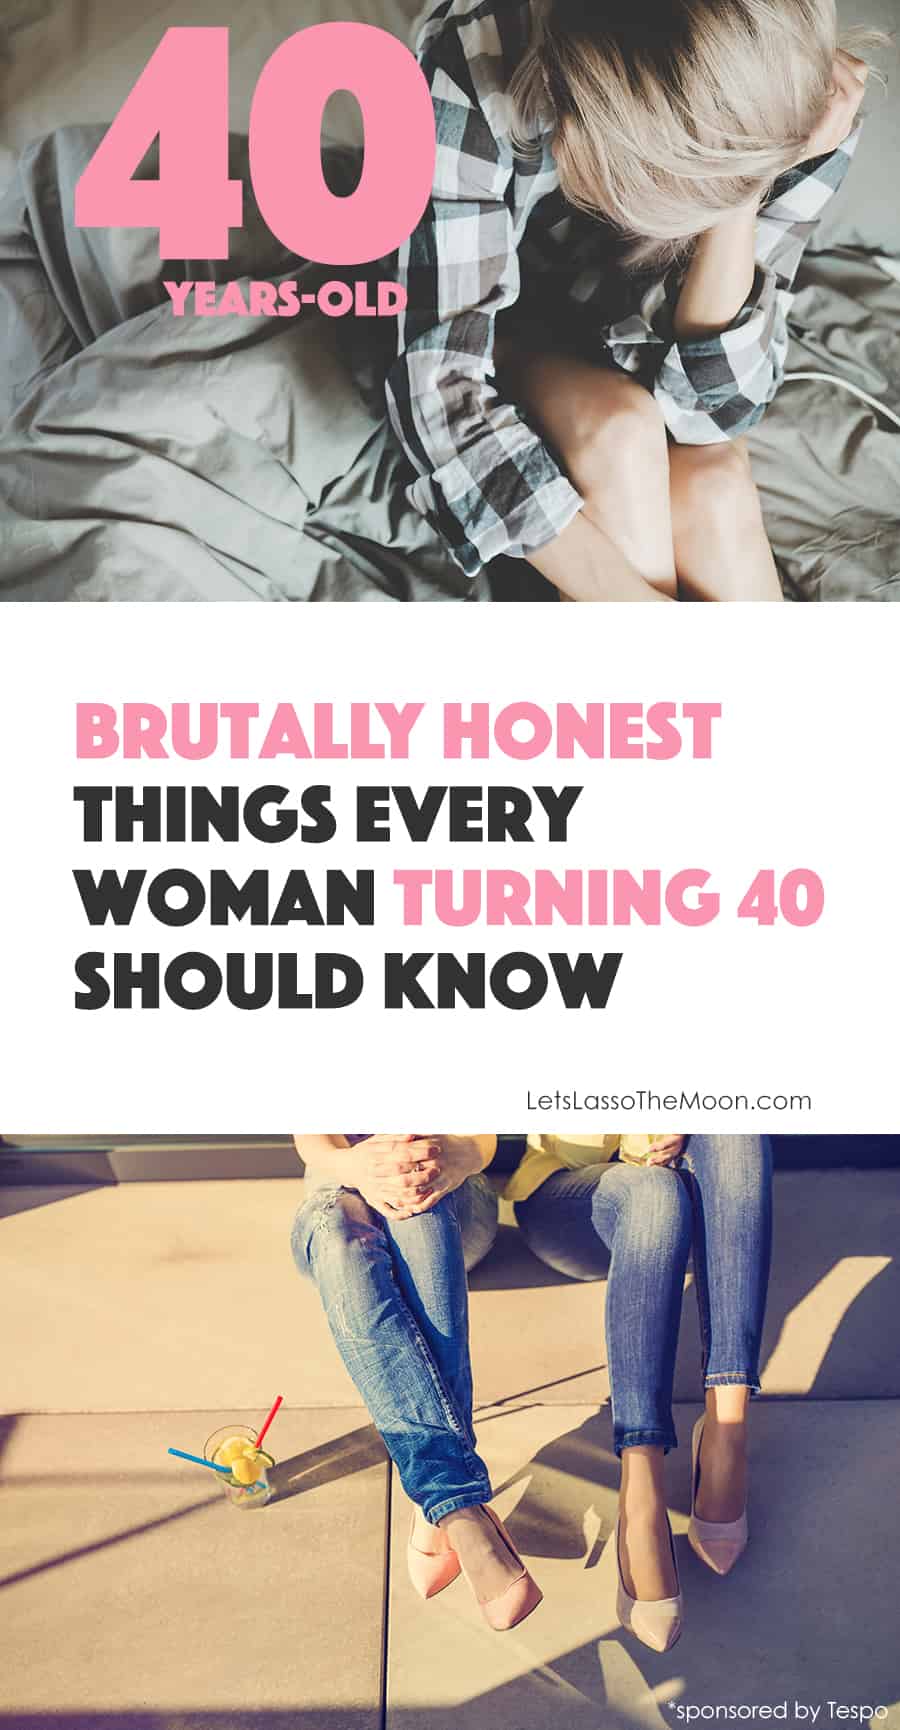 The major life milestone of turning 40 is often a time of reflection and transition. Below are five brutally honest things every woman should know when hitting the big 4-0. *Great post!